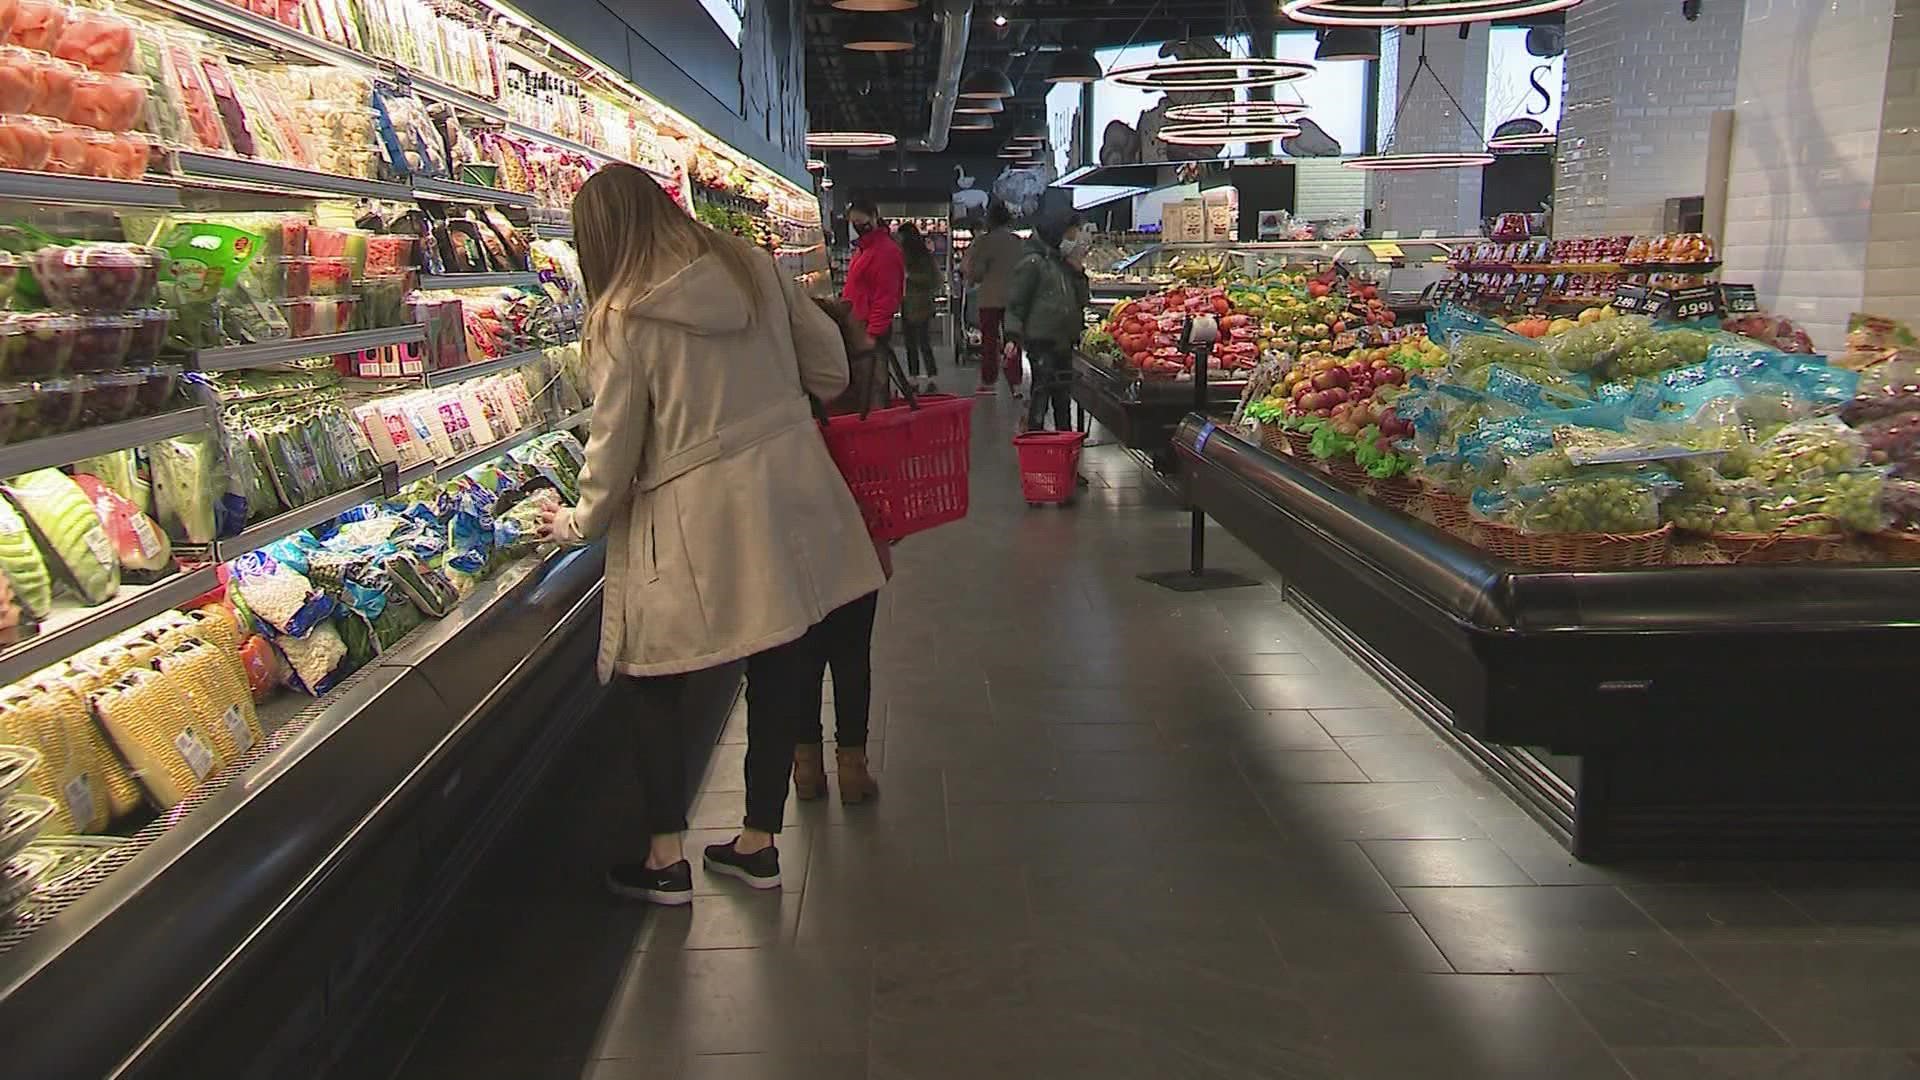 Government data is backing up what shoppers already know. Grocery prices are up to the tune of 13.5% since last year.